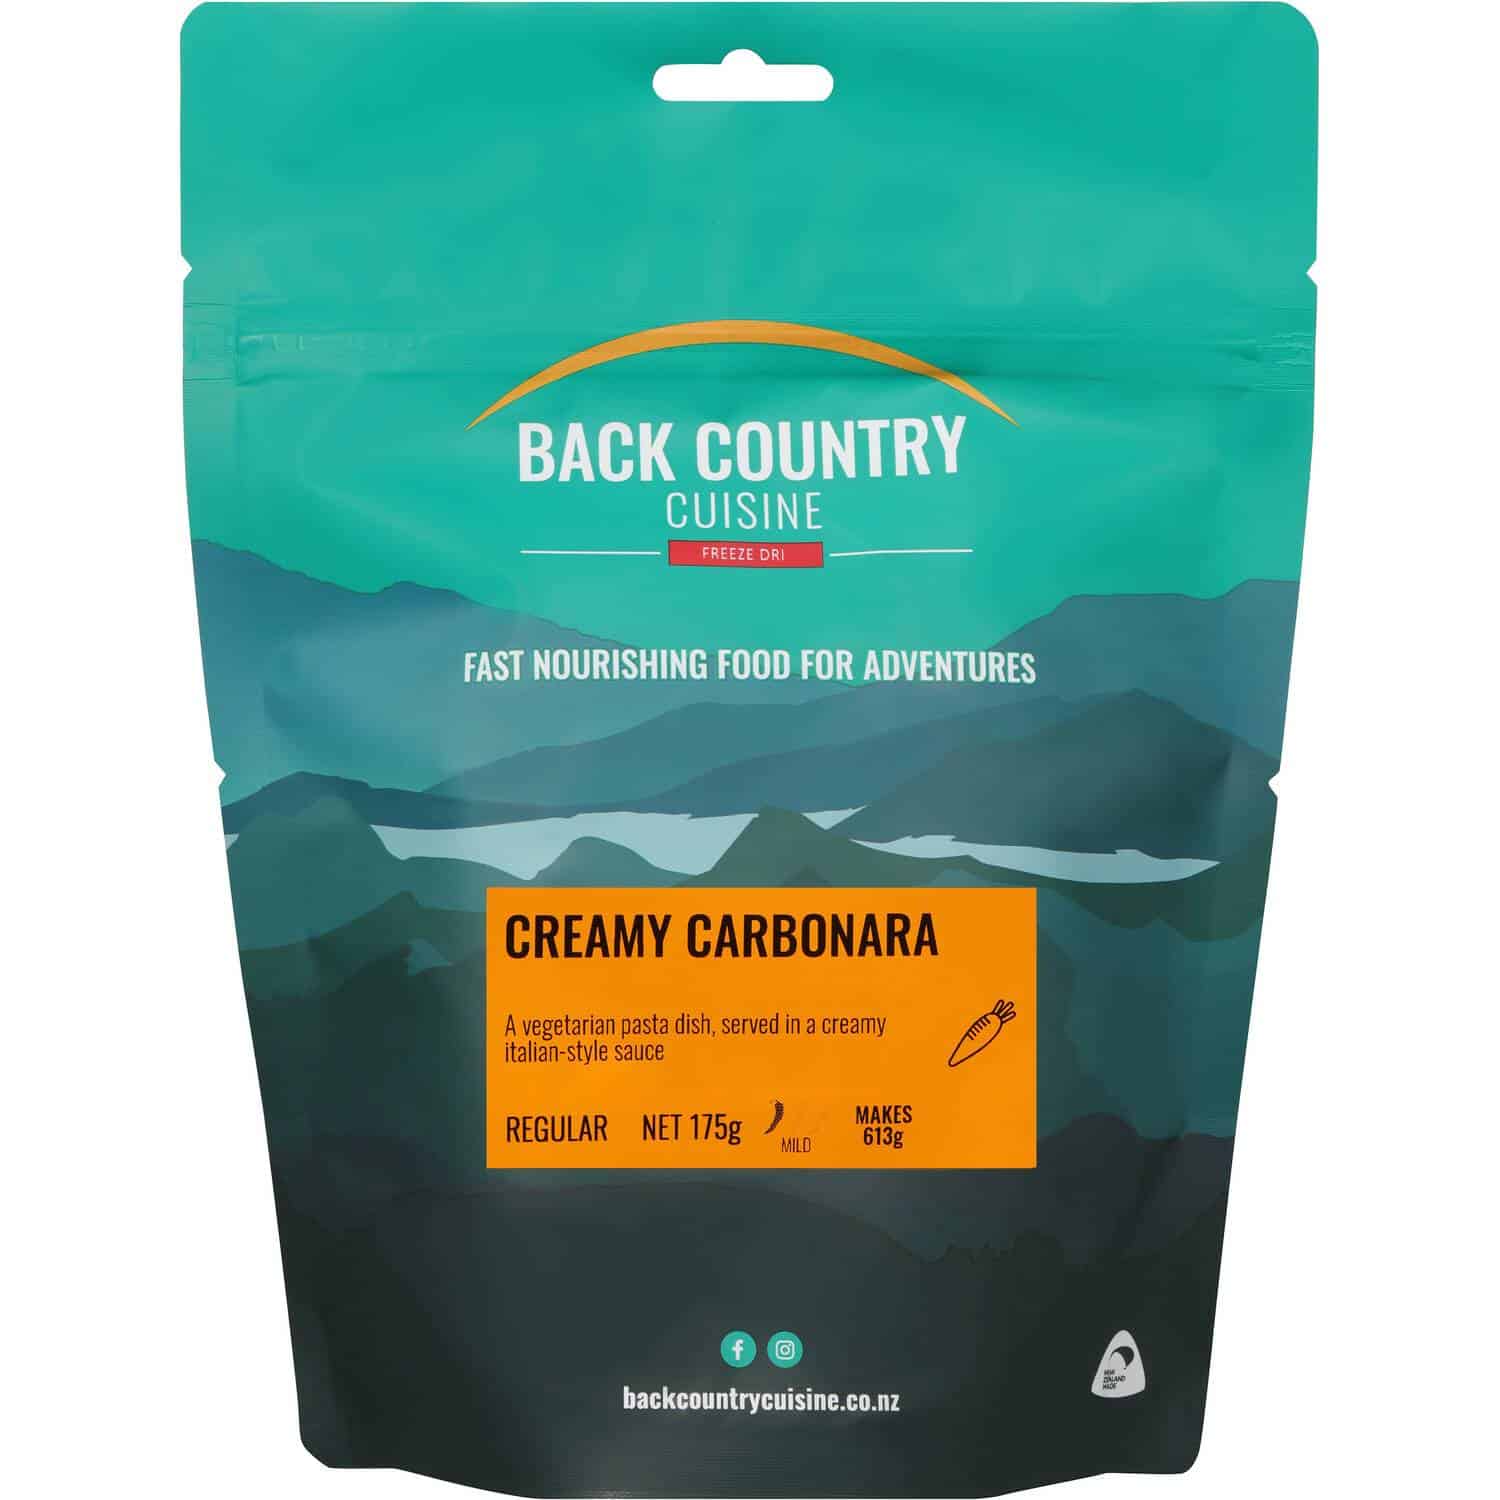 Back Country Cuisine Creamy Carbonara Regular - Tramping Food and Accessories sold by Venture Outdoors NZ